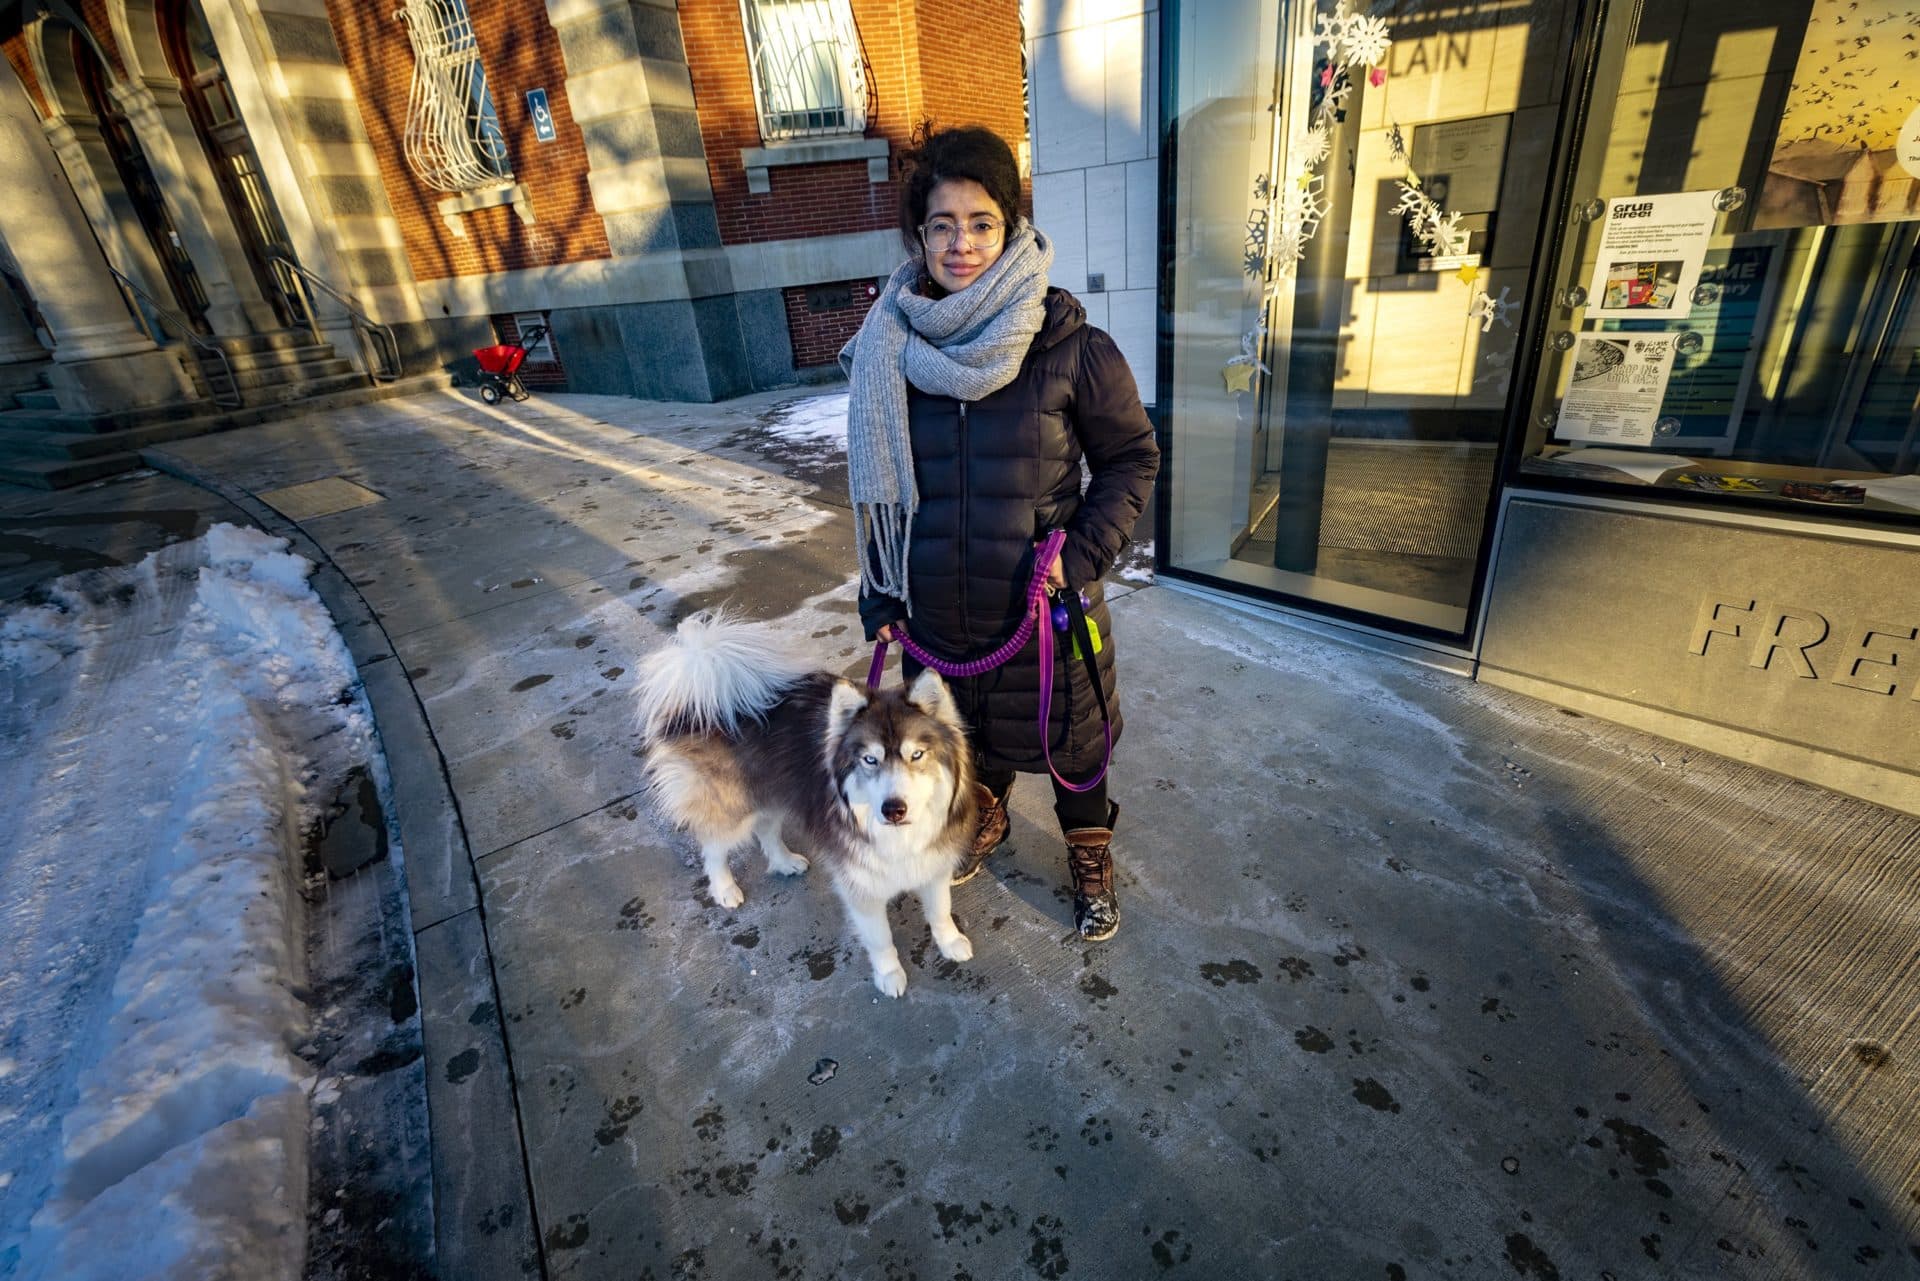 Tatiana Saenz with her dog outside of the Jamaica Plain branch of the Boston Public Library. (Jesse Coista/WBUR)